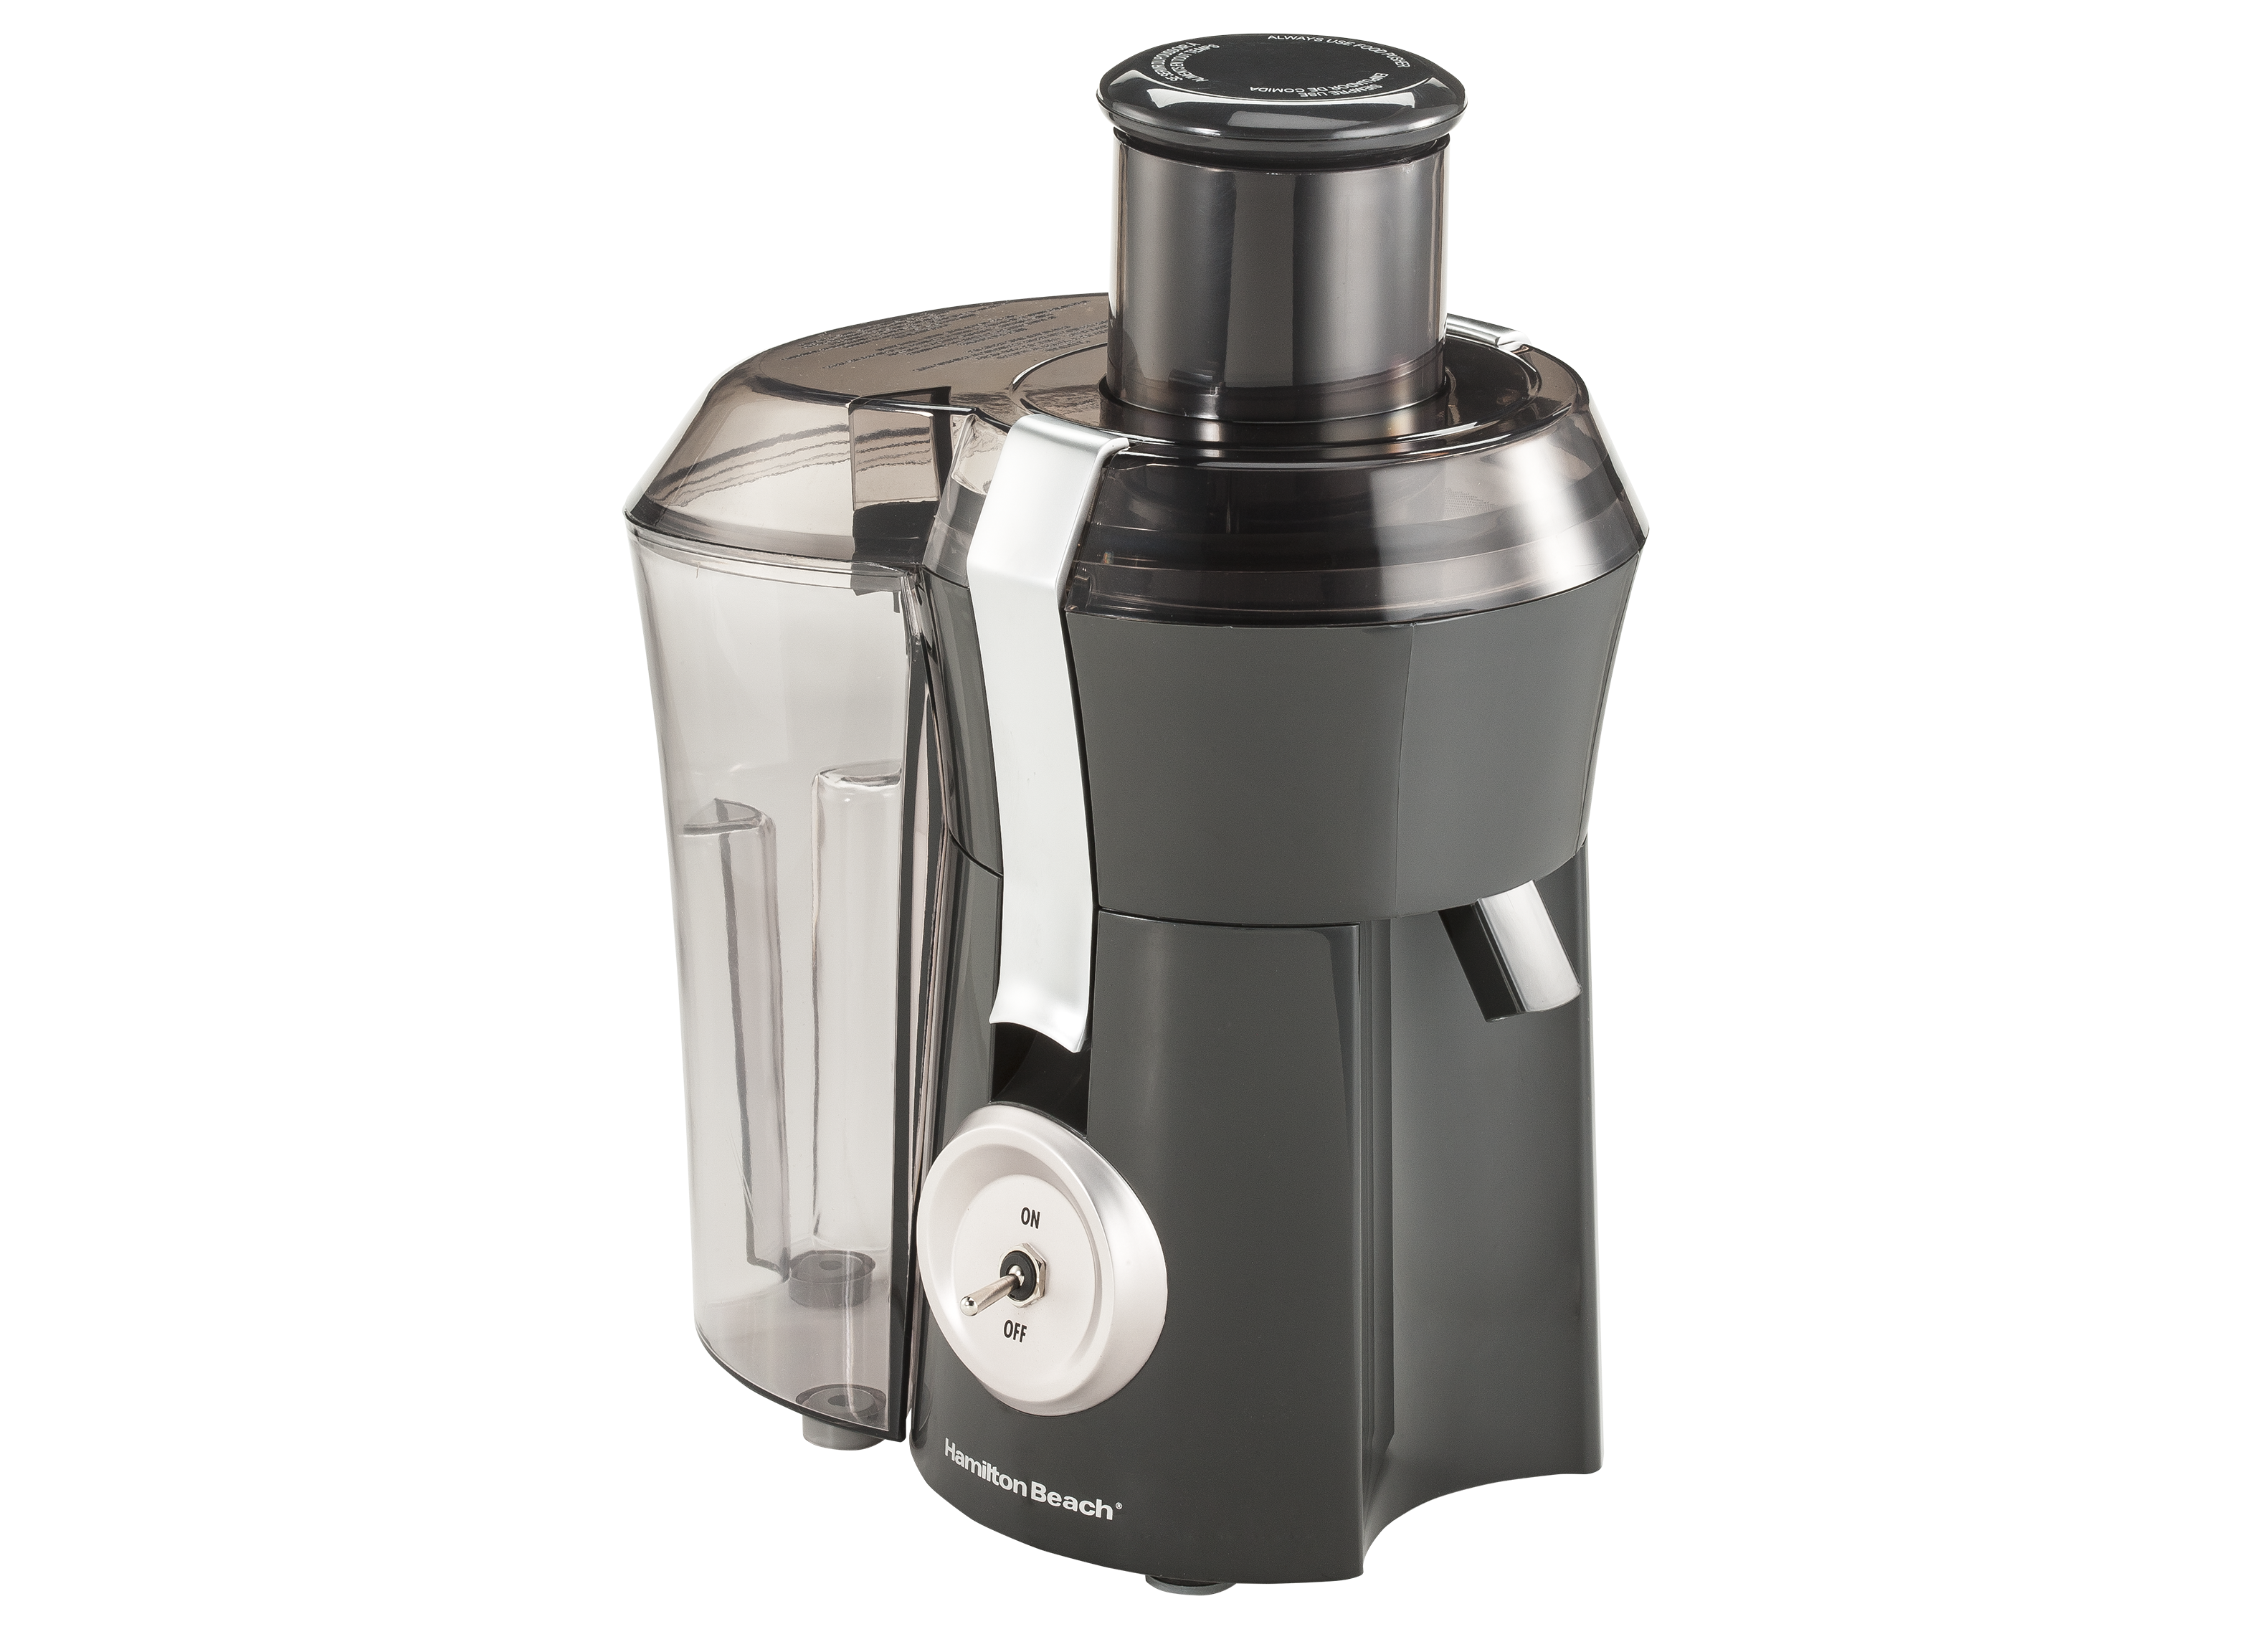 https://crdms.images.consumerreports.org/prod/products/cr/models/9623-juicers-hamiltonbeach-bigmouthpro67650.png